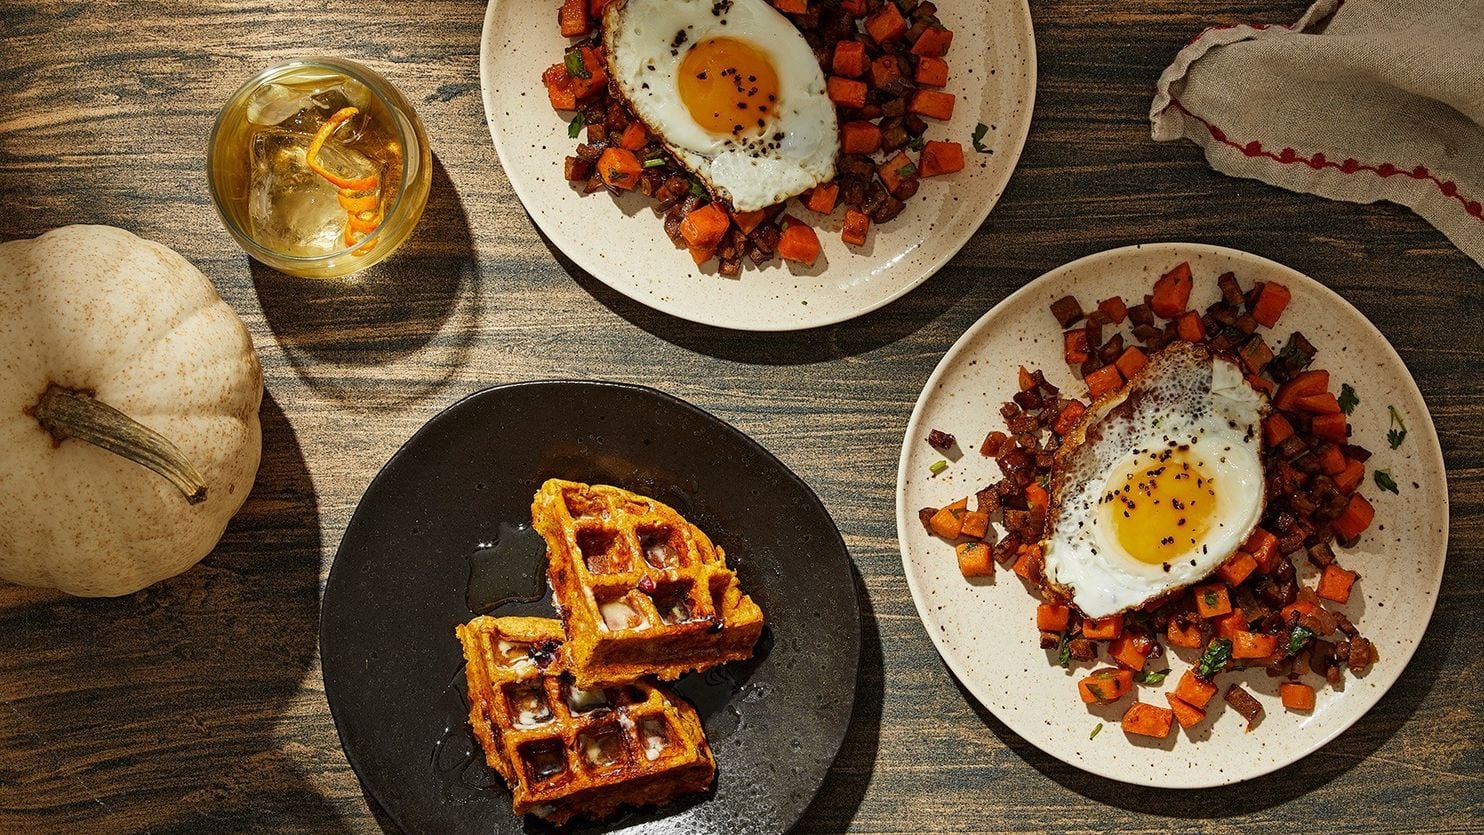 What Will Your Next Boyfriend Be Like? Make Some Tough Food Choices to Find Out brunch dishes